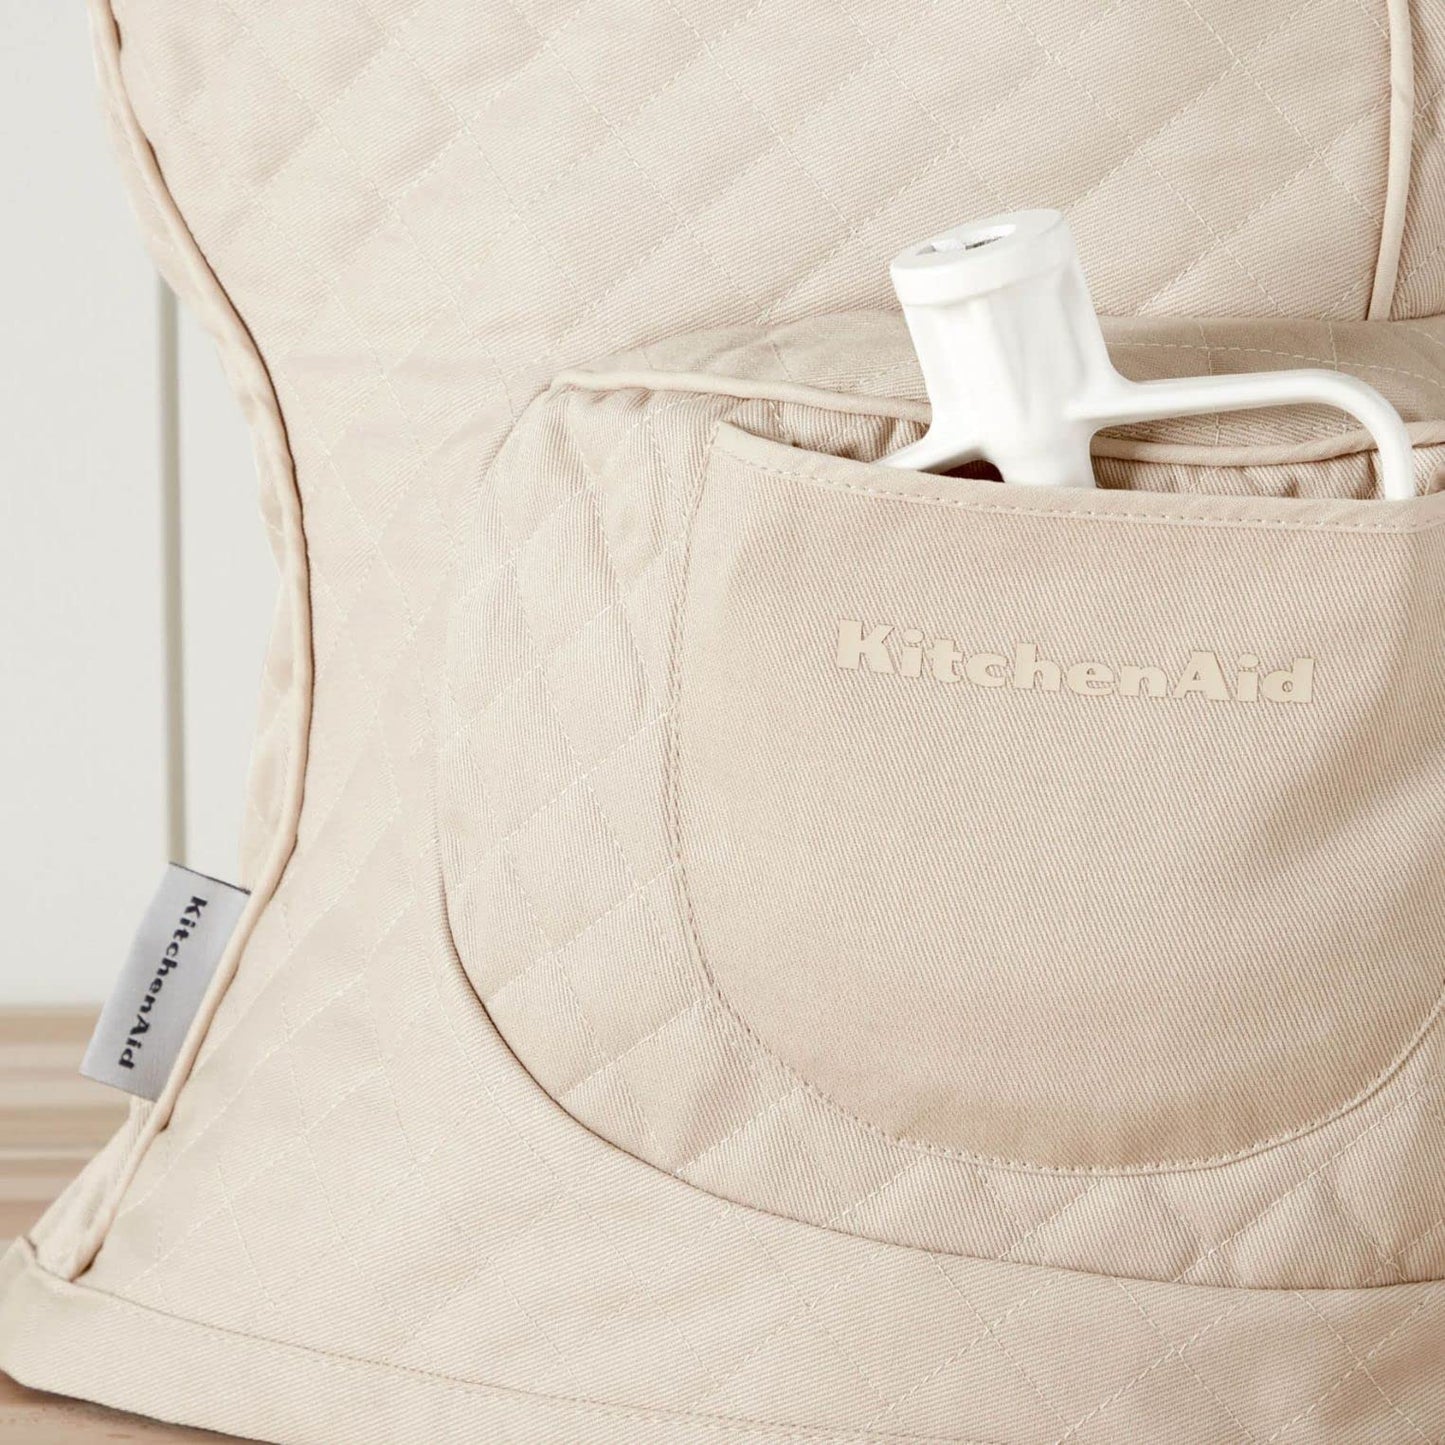 KITCHENAID Fitted Tilt-Head Solid Stand Mixer Cover with Storage Pocket, Quilted 100% Cotton, Milkshake, 14.4"x18"x10"